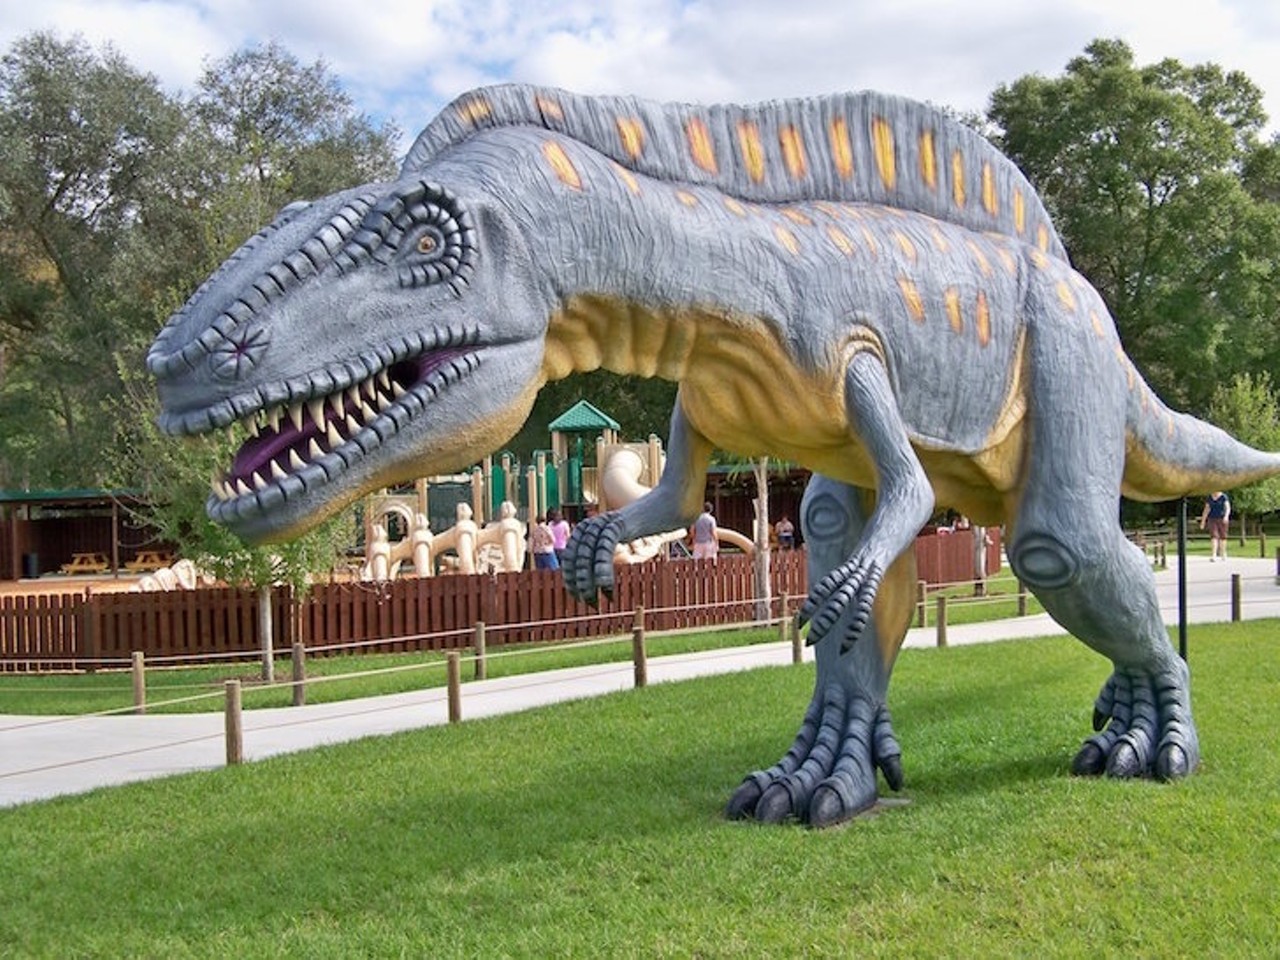 Dinosaur World
Estimated time: 25 minutes       
More than 150 life-size outdoor models of dinosaurs rule over a fossil dig, museum and lots of paleontological-themed activities. Dinosaur World is Central Florida&#146;s only dedication to these beasts of the past, set in a lush Florida-centric foliage. 
Photo via Dinosaur World/Facebook